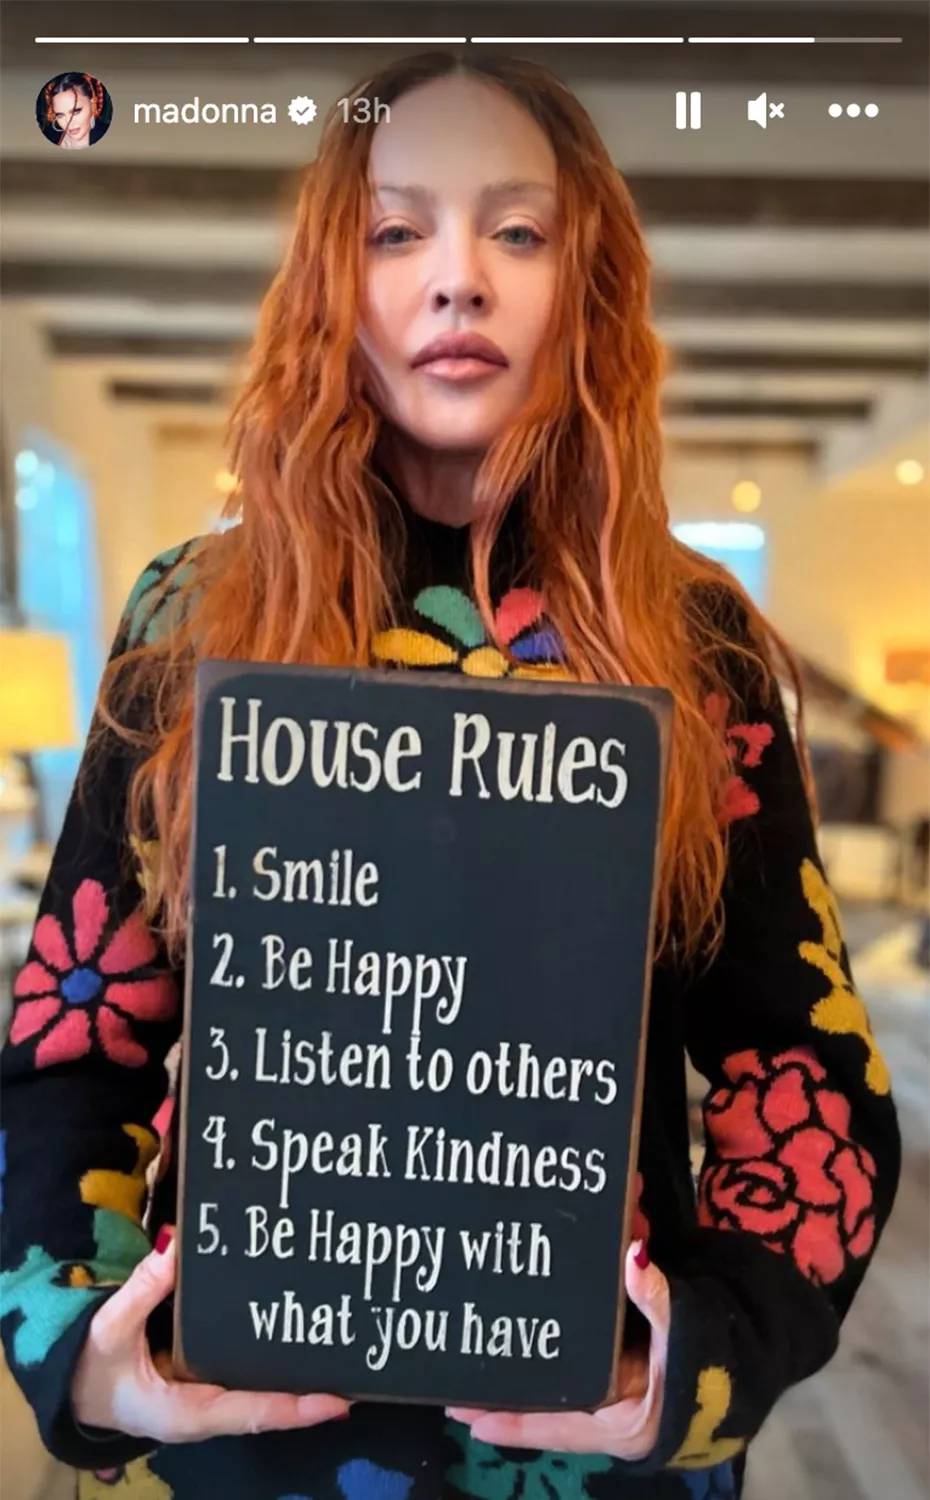 Madonna suggests five simple house rules for her children: Read